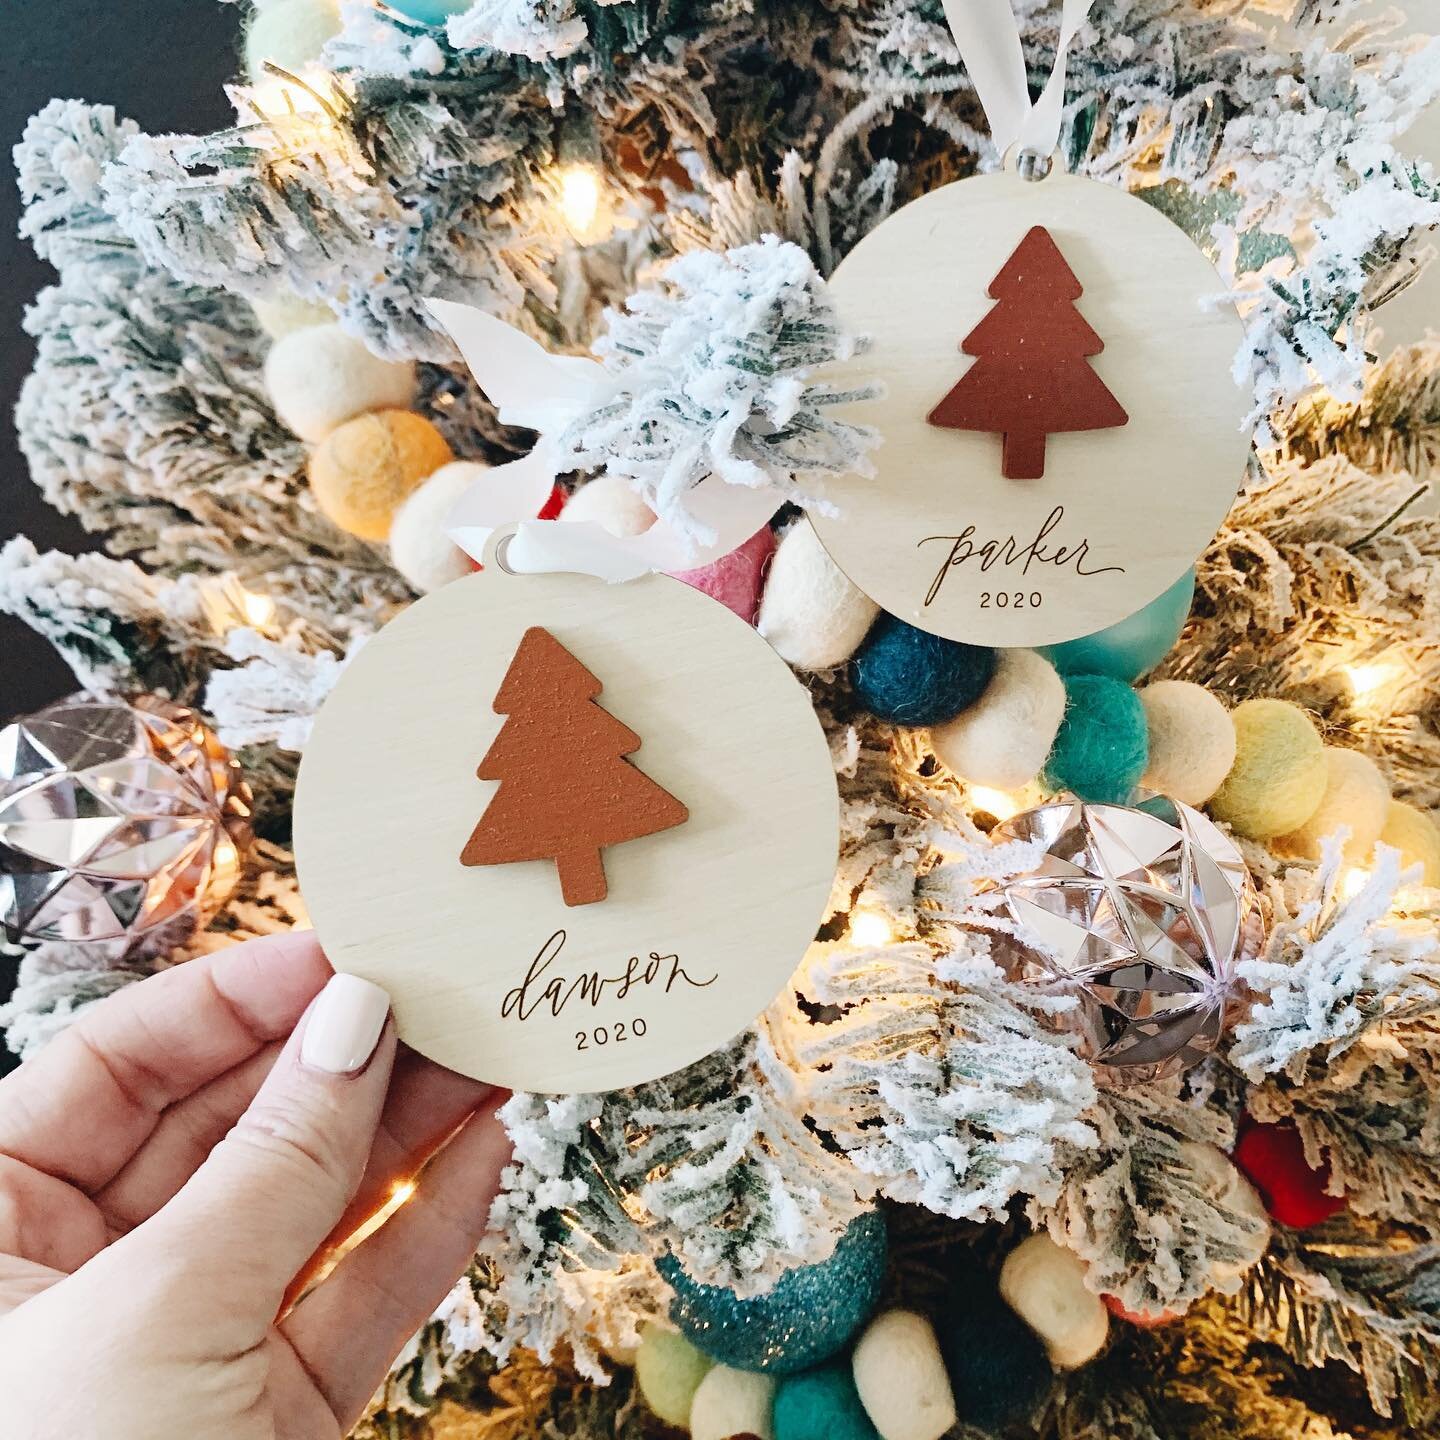 It&rsquo;s *almost* the most wonderful time of the year so @pretty.littleco are giving away $40 credit to EACH of our Etsy shops to get you in the holiday spirit ✨
To enter:
🎄Make sure you&rsquo;re following me, @sugarpinecalligraphy &amp; @pretty.l